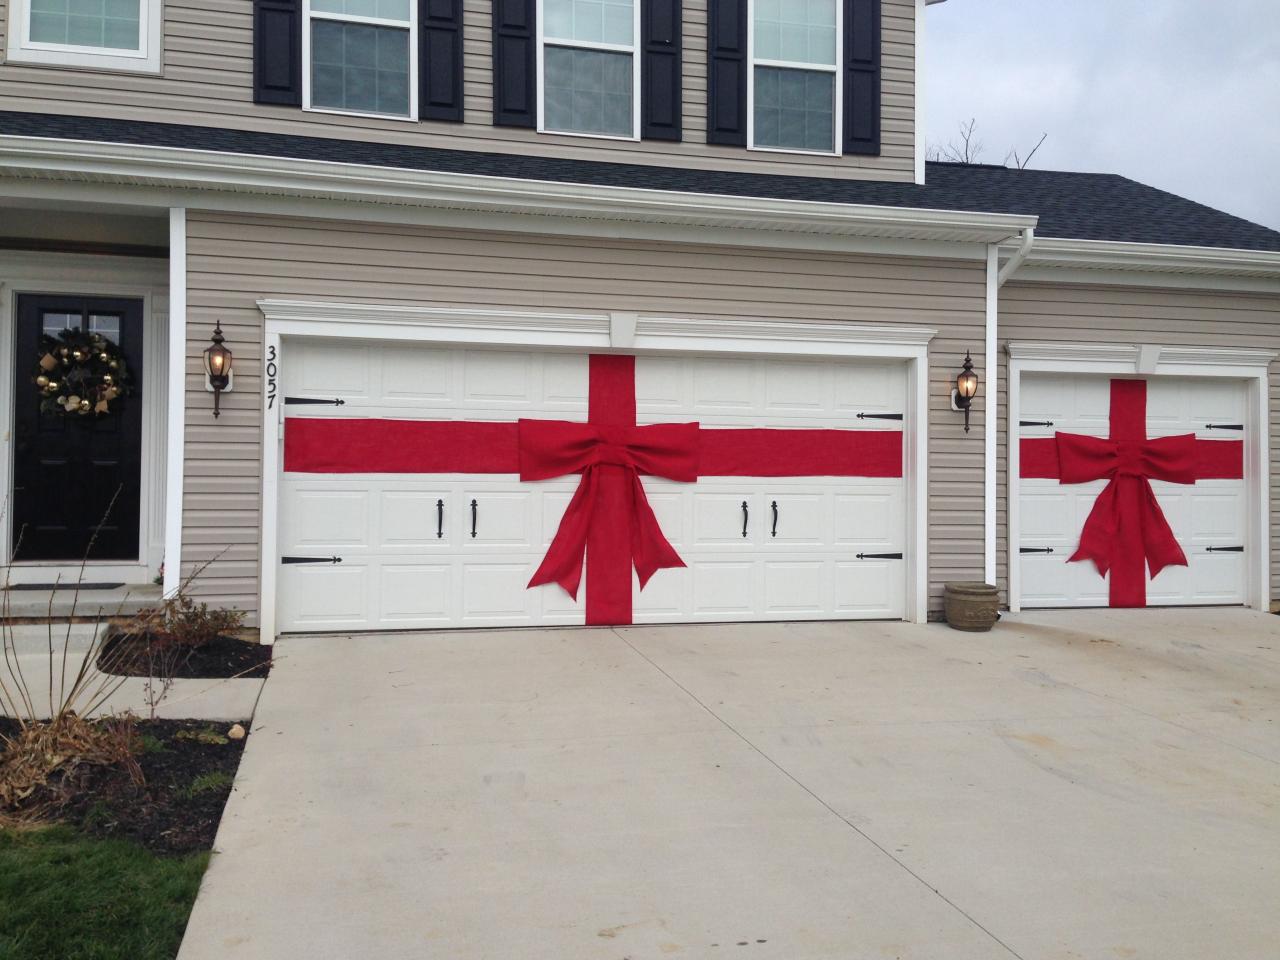 Diy Red Burlap Ribbon And Bow For Christmas Decor For Garage Doors. … |  Easy Outdoor Christmas Decorations, Outdoor Christmas Diy, Christmas  Decorations Diy Outdoor